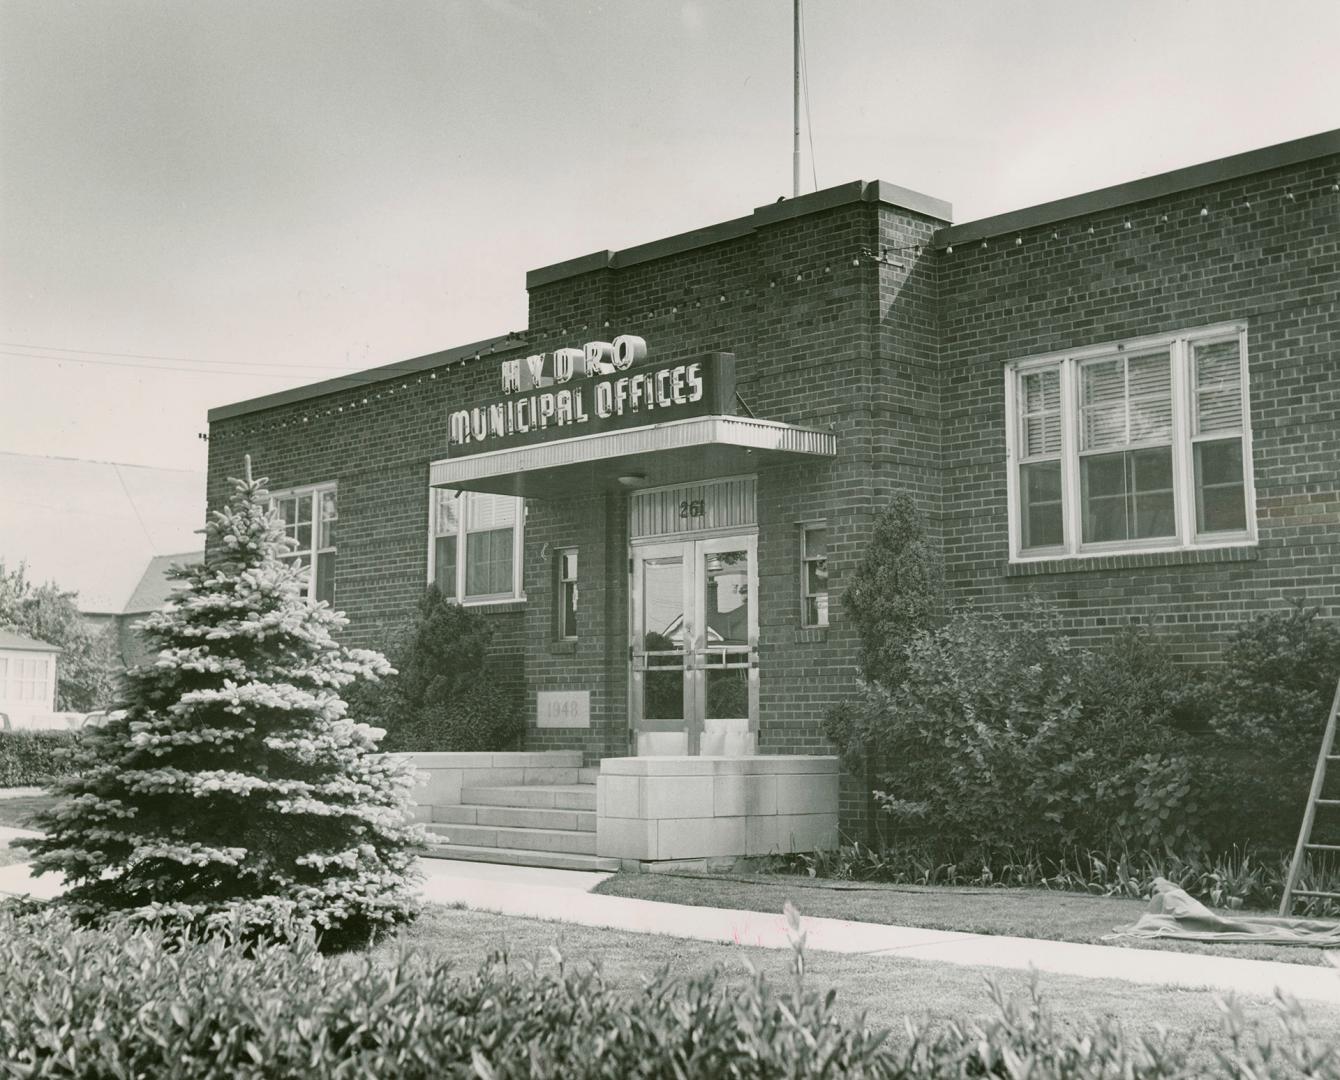 Hydro Municipal Offices in Mimico, Ont.